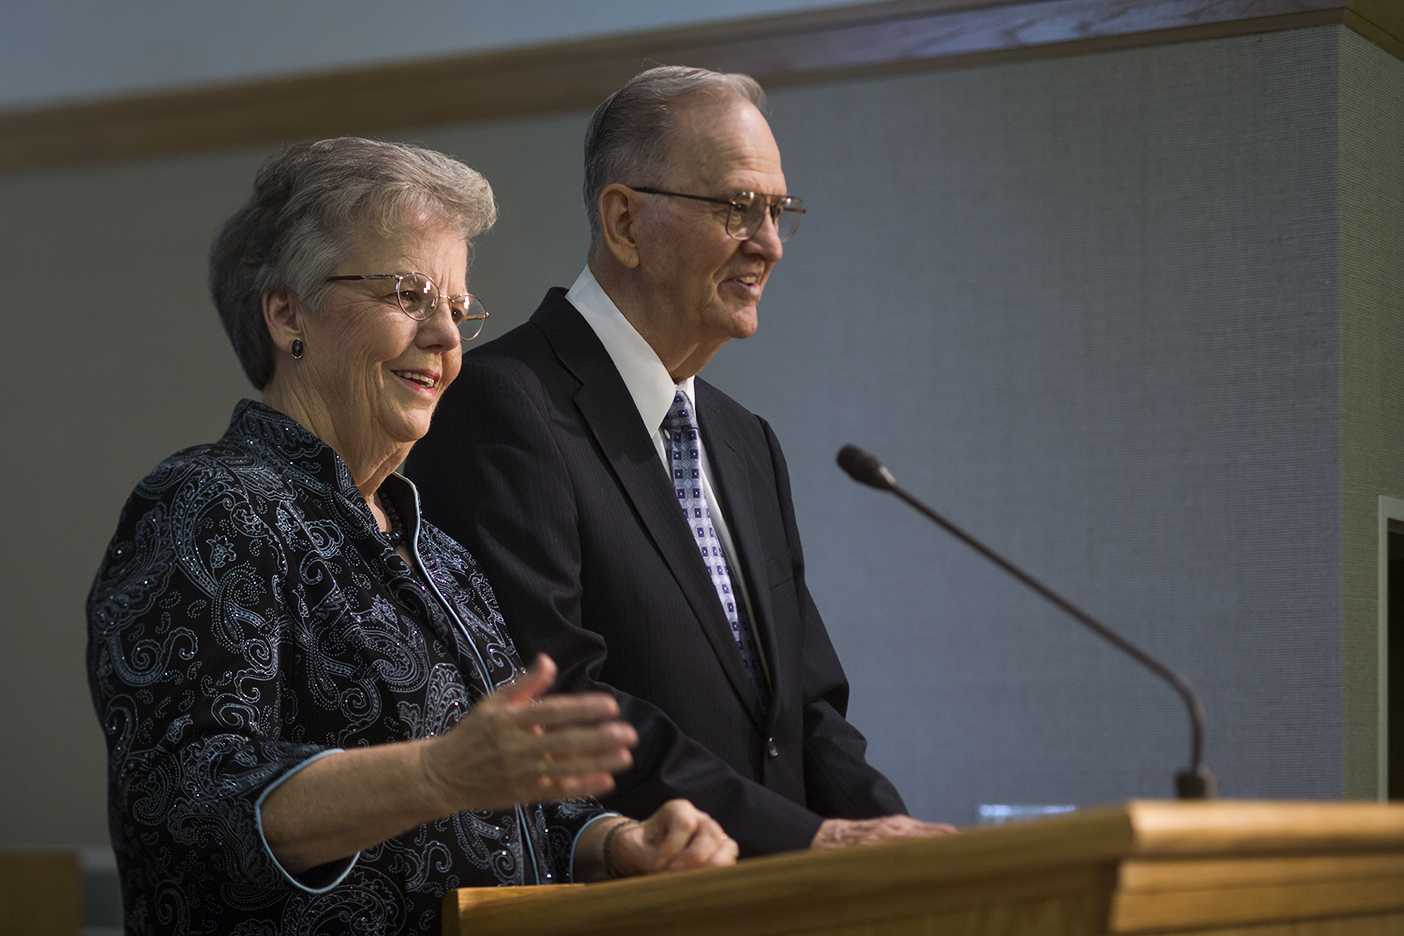 Janice Knapp Perry stands with her husband at a pulpit